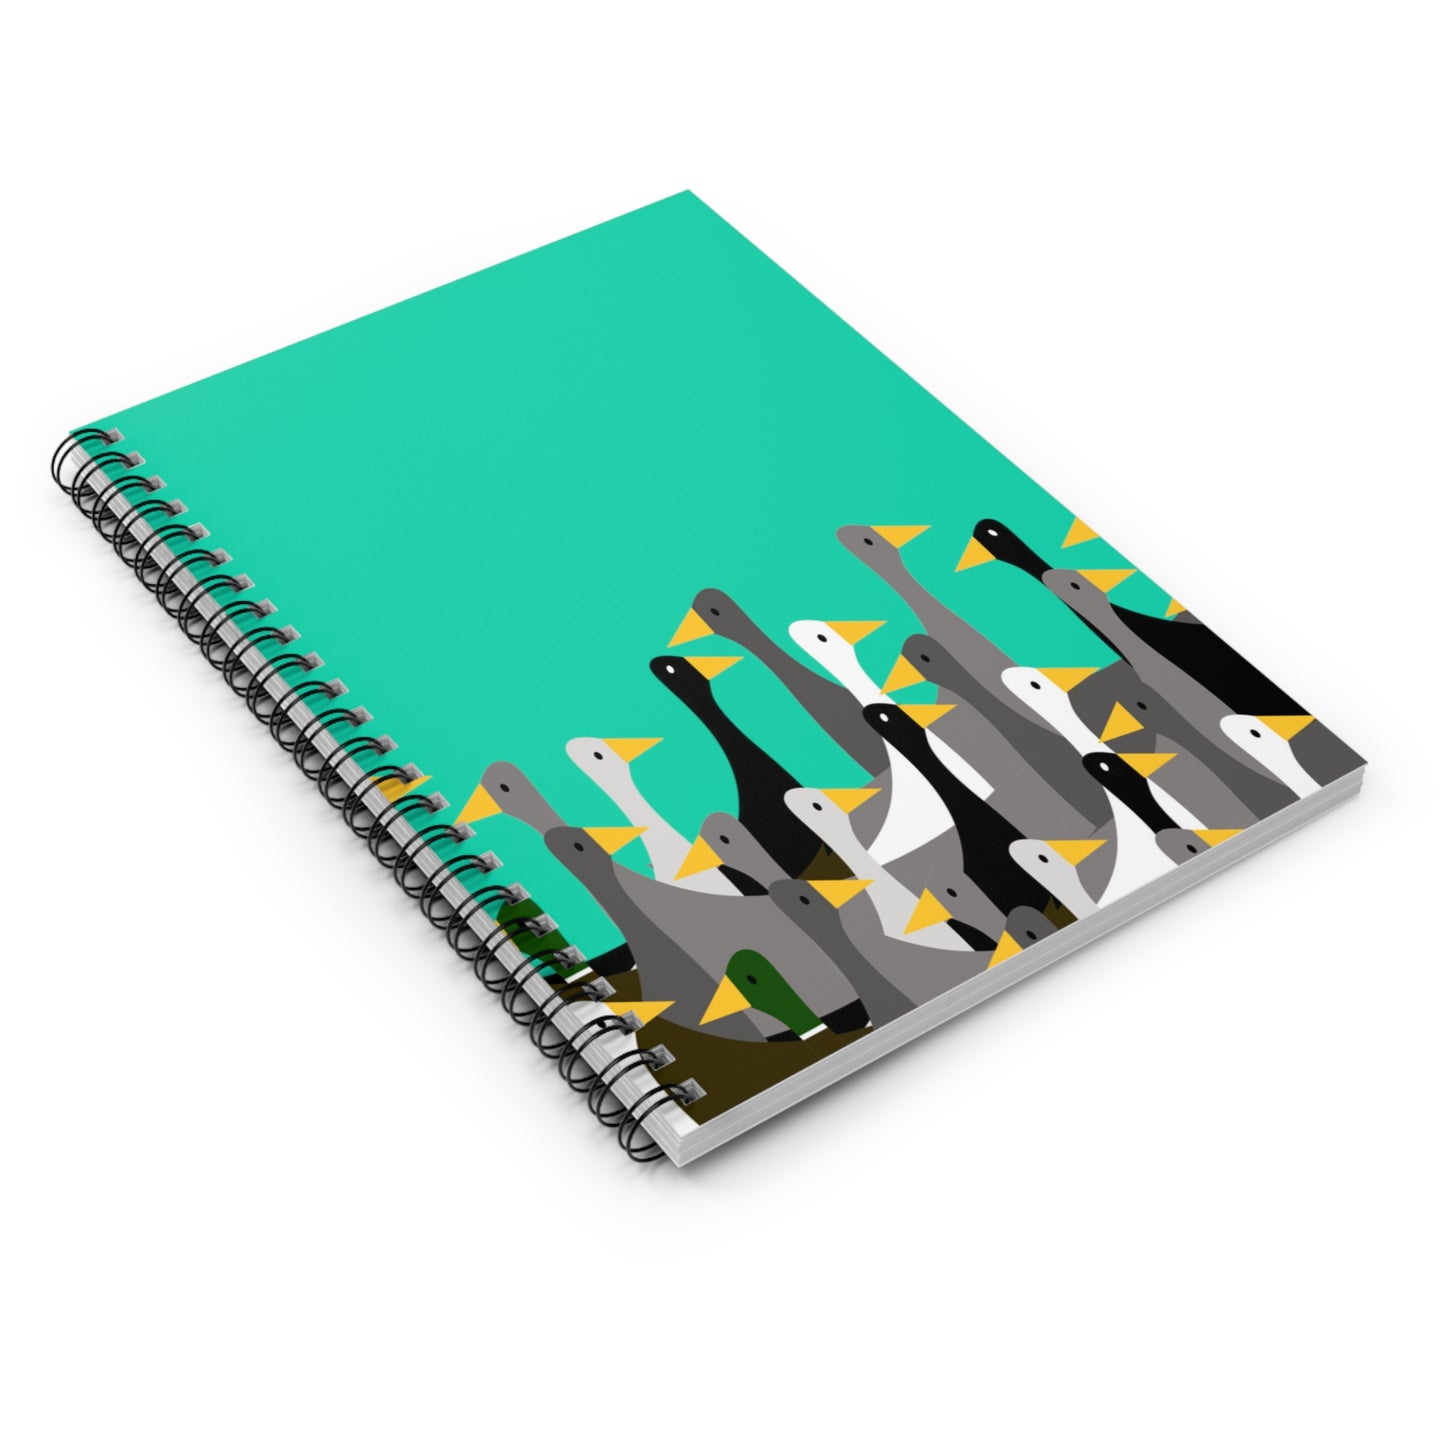 Not as many ducks - Turquoise 12d3ad - Spiral Notebook - Ruled Line